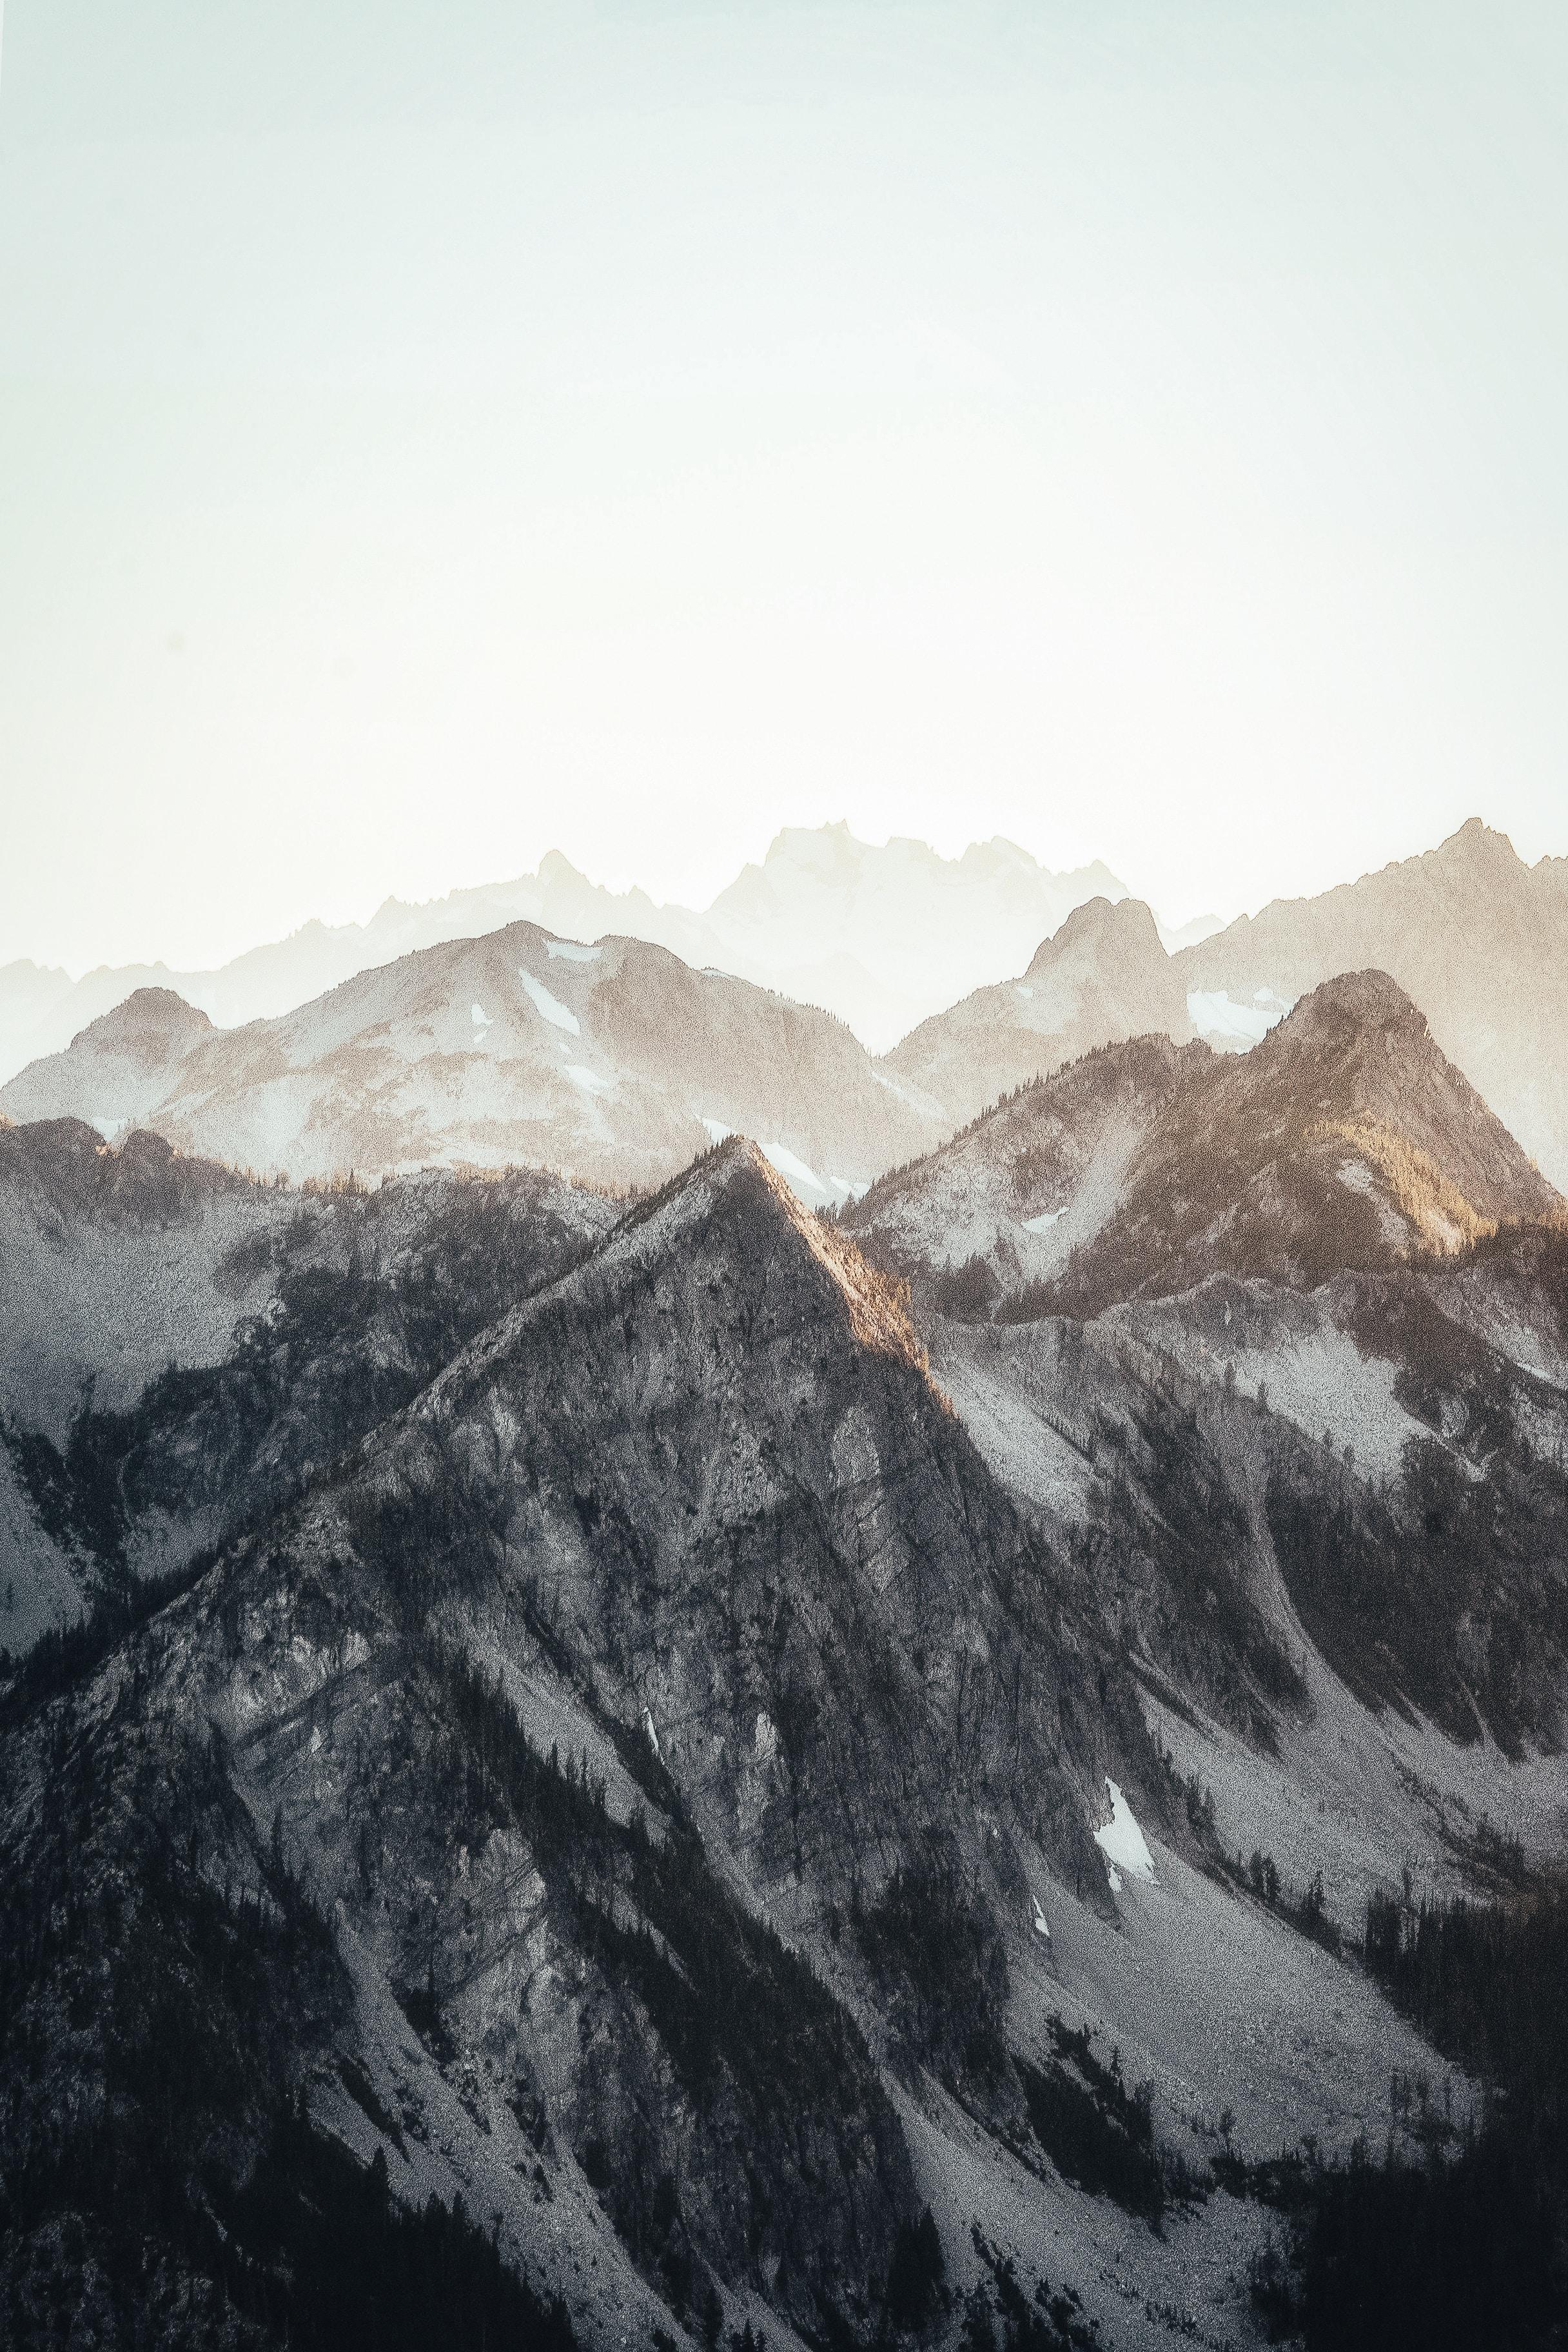 4K Mountain Wallpaper That Will Leave You Breathless Tablet